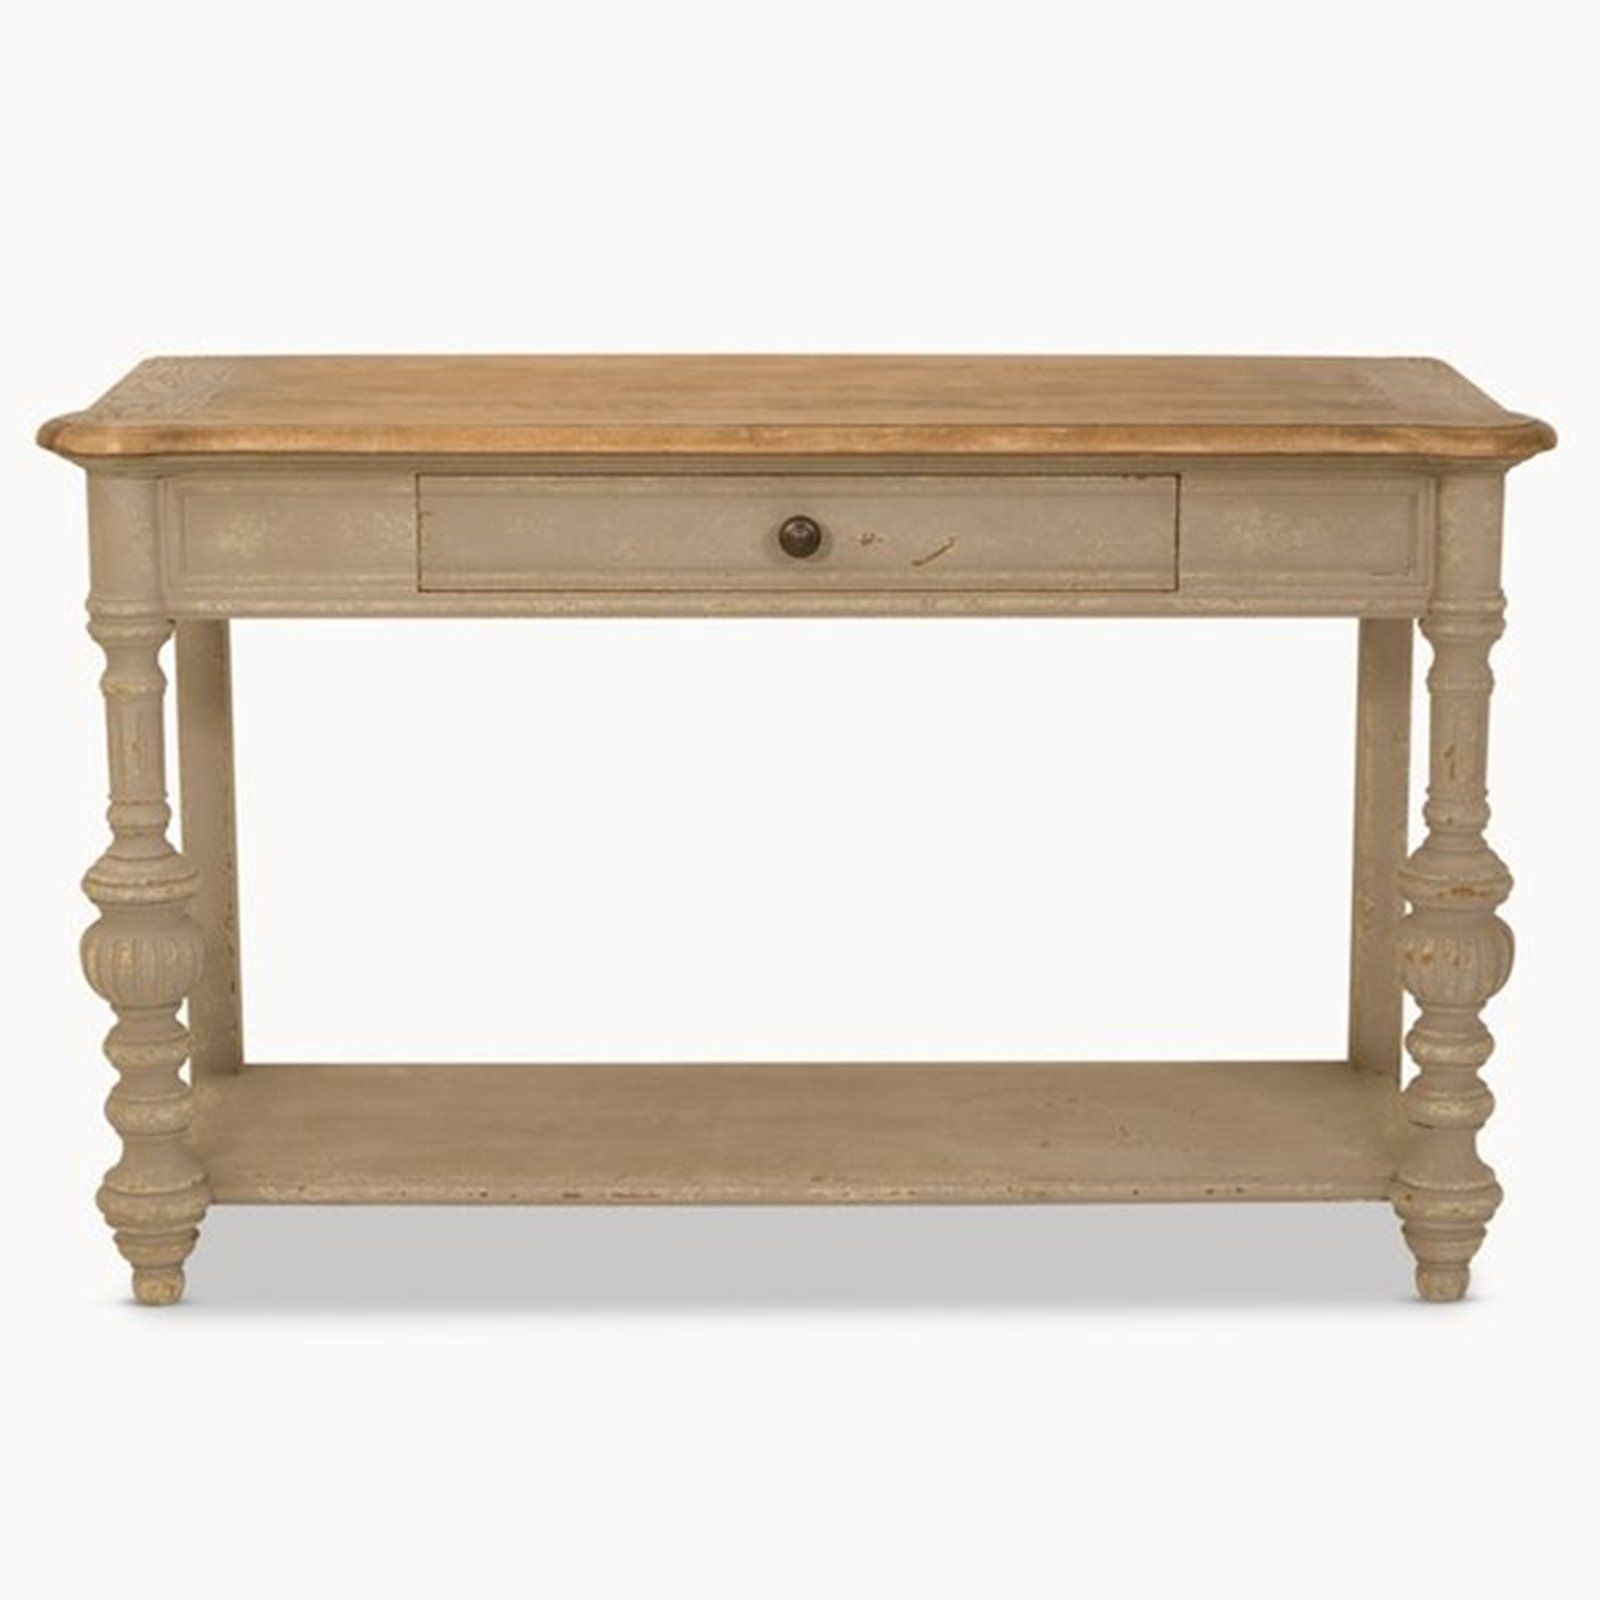 Colonial Grey Vintage Oak Console Table Pertaining To Famous Vintage Gray Oak Coffee Tables (Gallery 9 of 20)